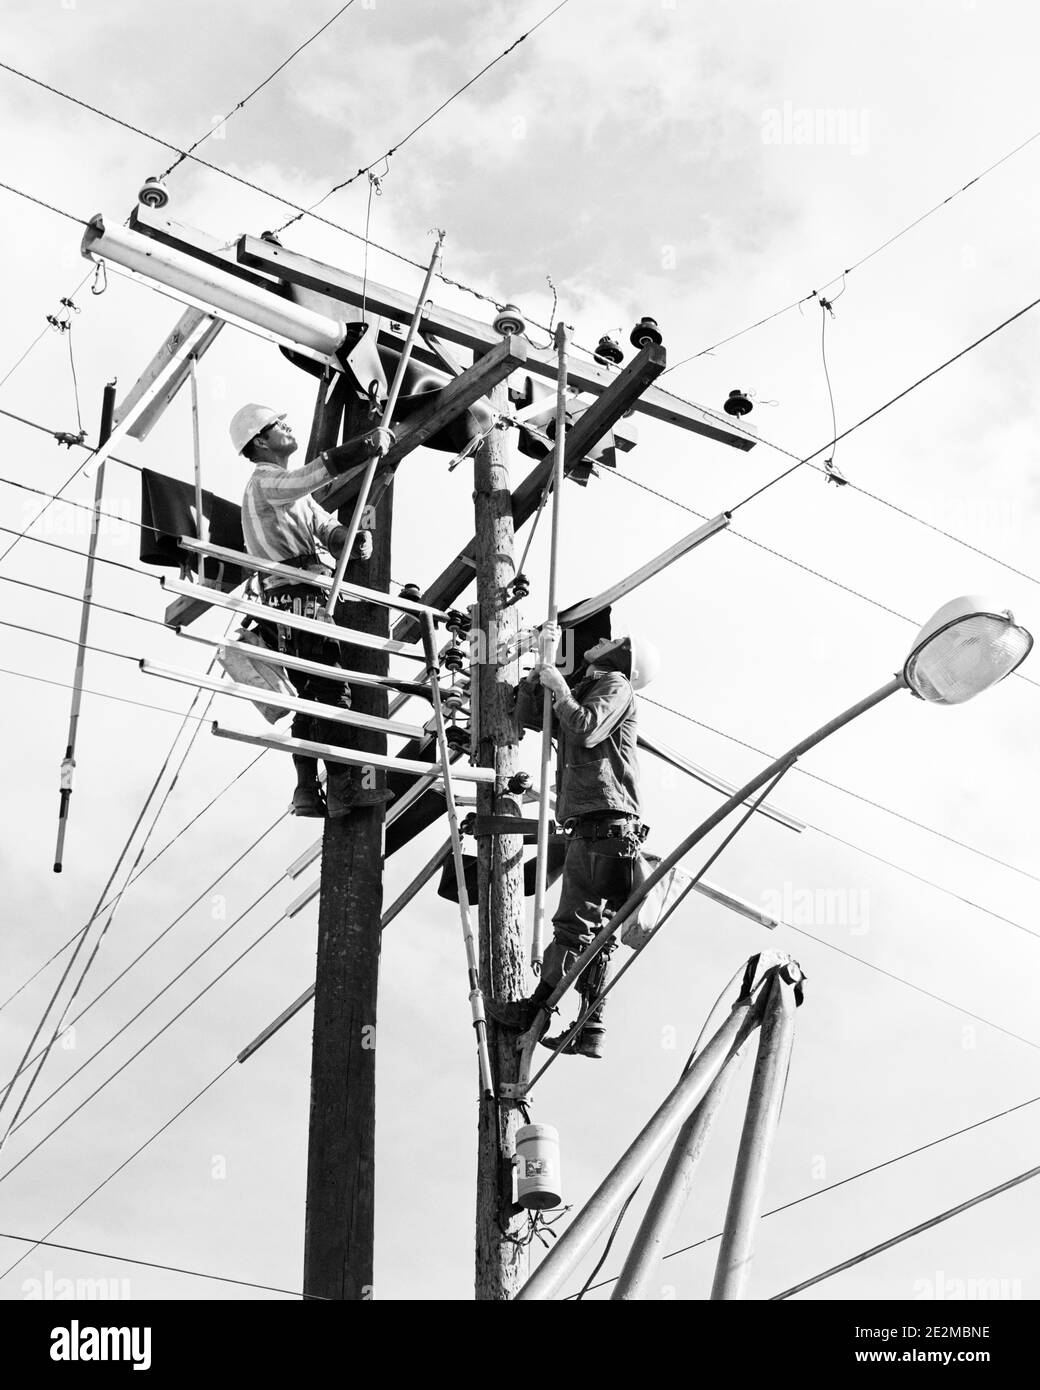 1960s TWO MEN WORKING ON PUBLIC UTILITY ELECTRICAL WIRES AT TOP OF POWER  POLES - i5376 HAR001 HARS PROTECTION LABOR EMPLOYMENT LINES OCCUPATIONS  MAINTENANCE UTILITY EMPLOYEE LINEMAN STREET LAMP LINEMEN MID-ADULT MID-ADULT